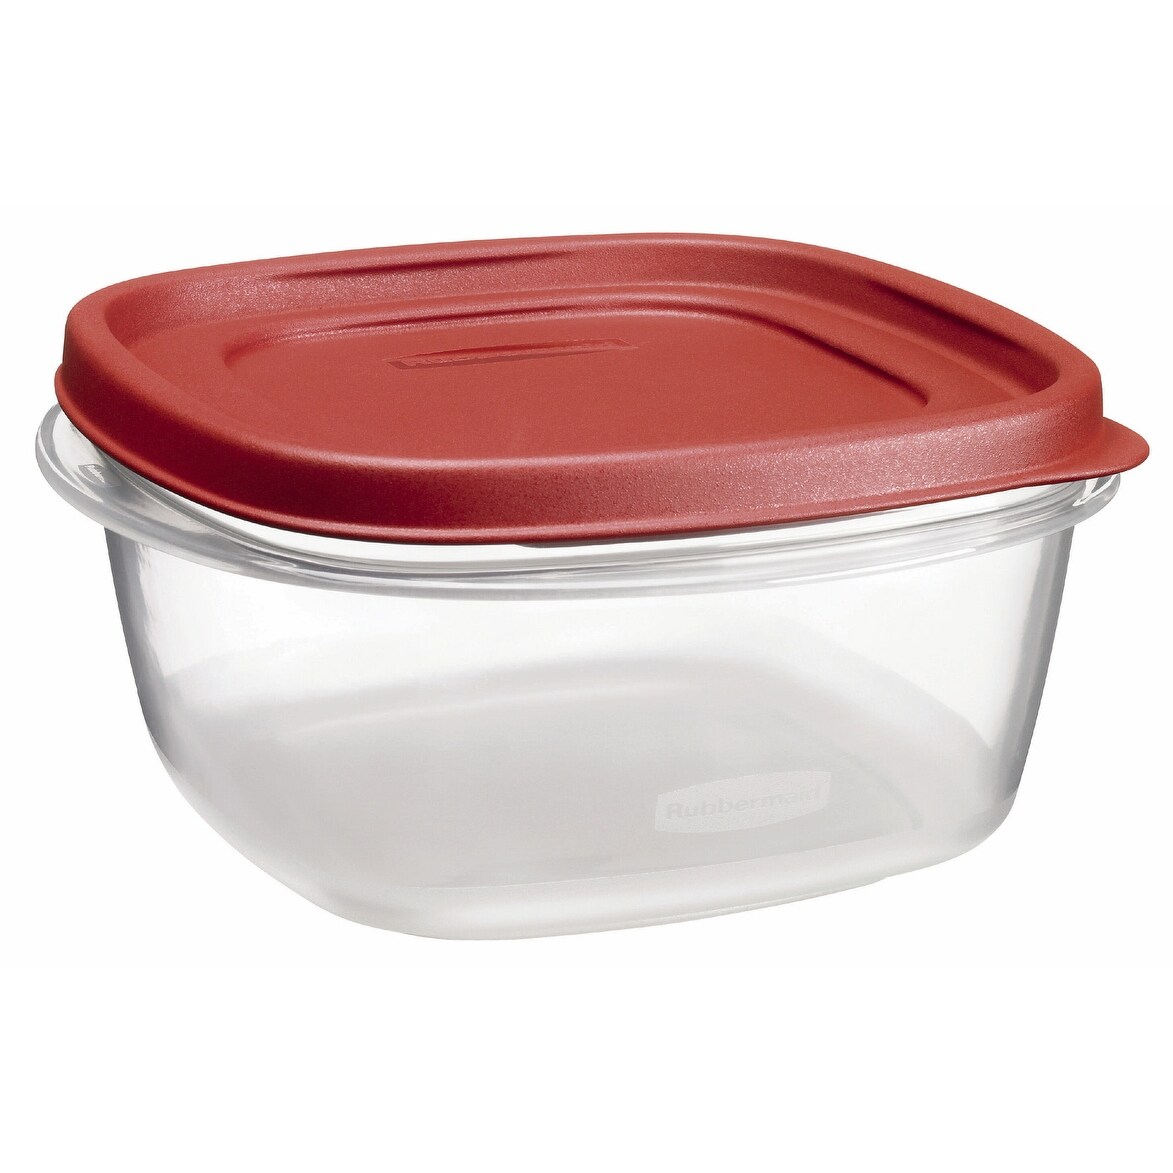 Rubbermaid Plastic Easy Find Lid Food Storage Container, 1.5 Gal, 1777163  set of 2 